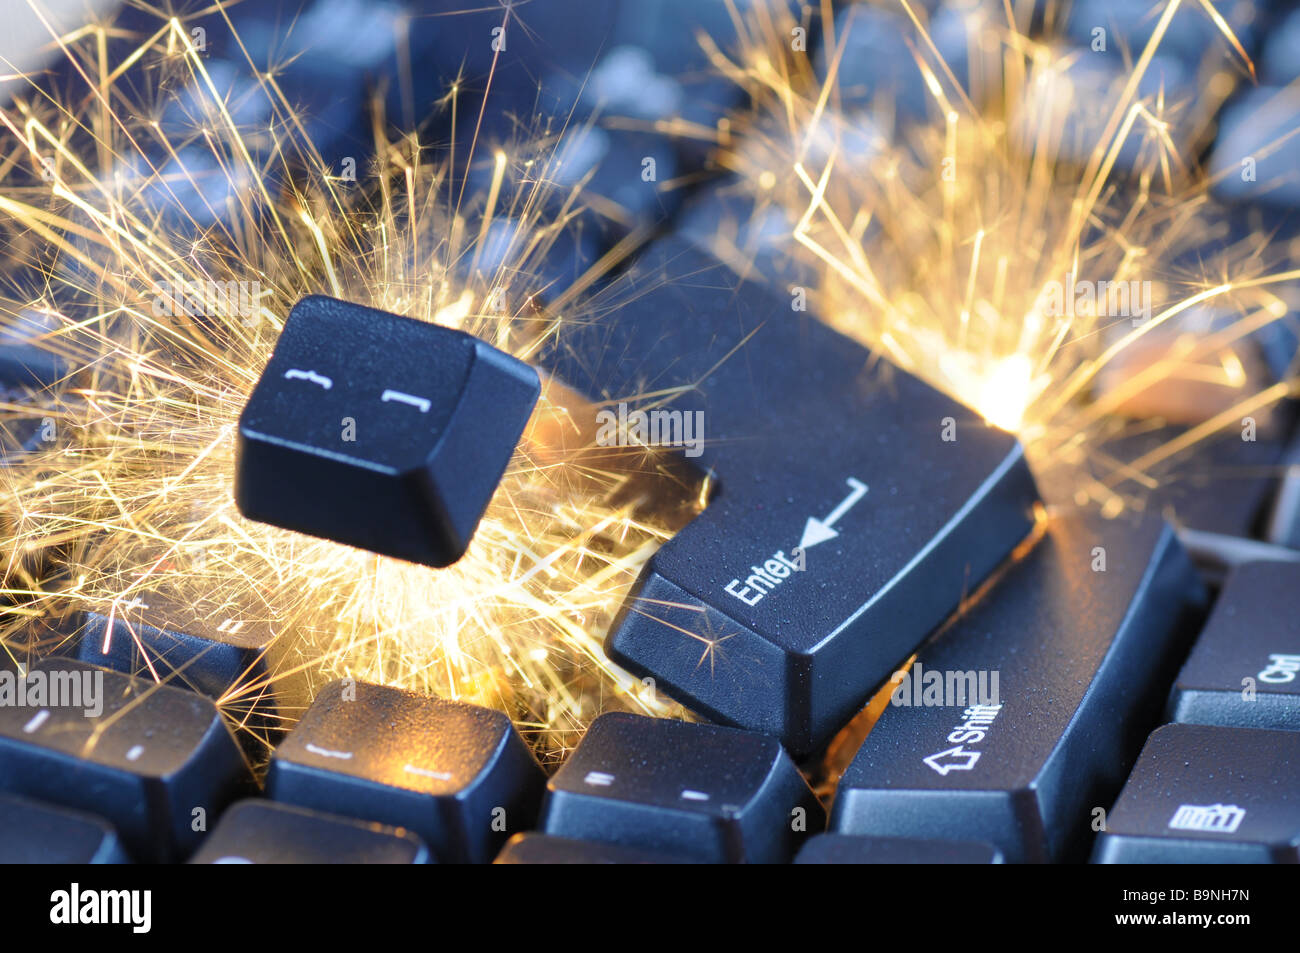 Black exploding computer keyboard with electric sparks. Stock Photo